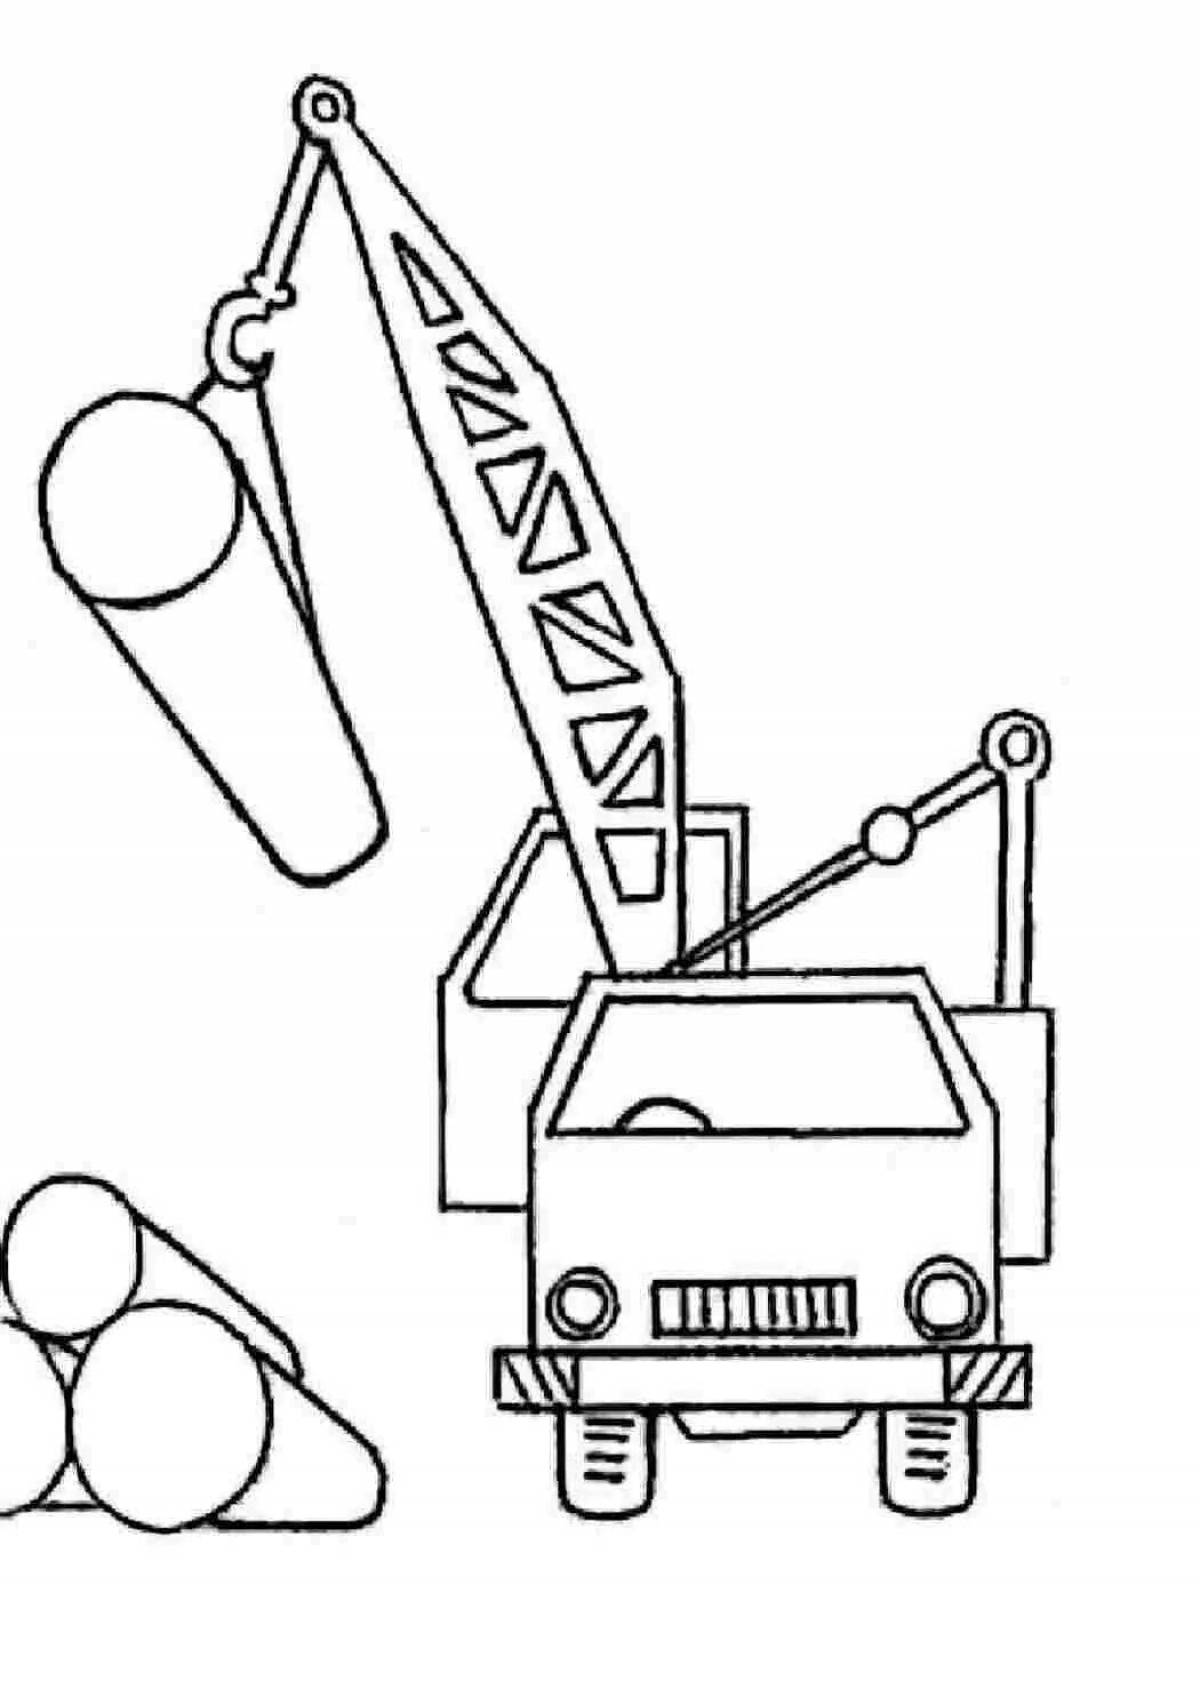 Inspiring crane coloring book for 3-4 year olds